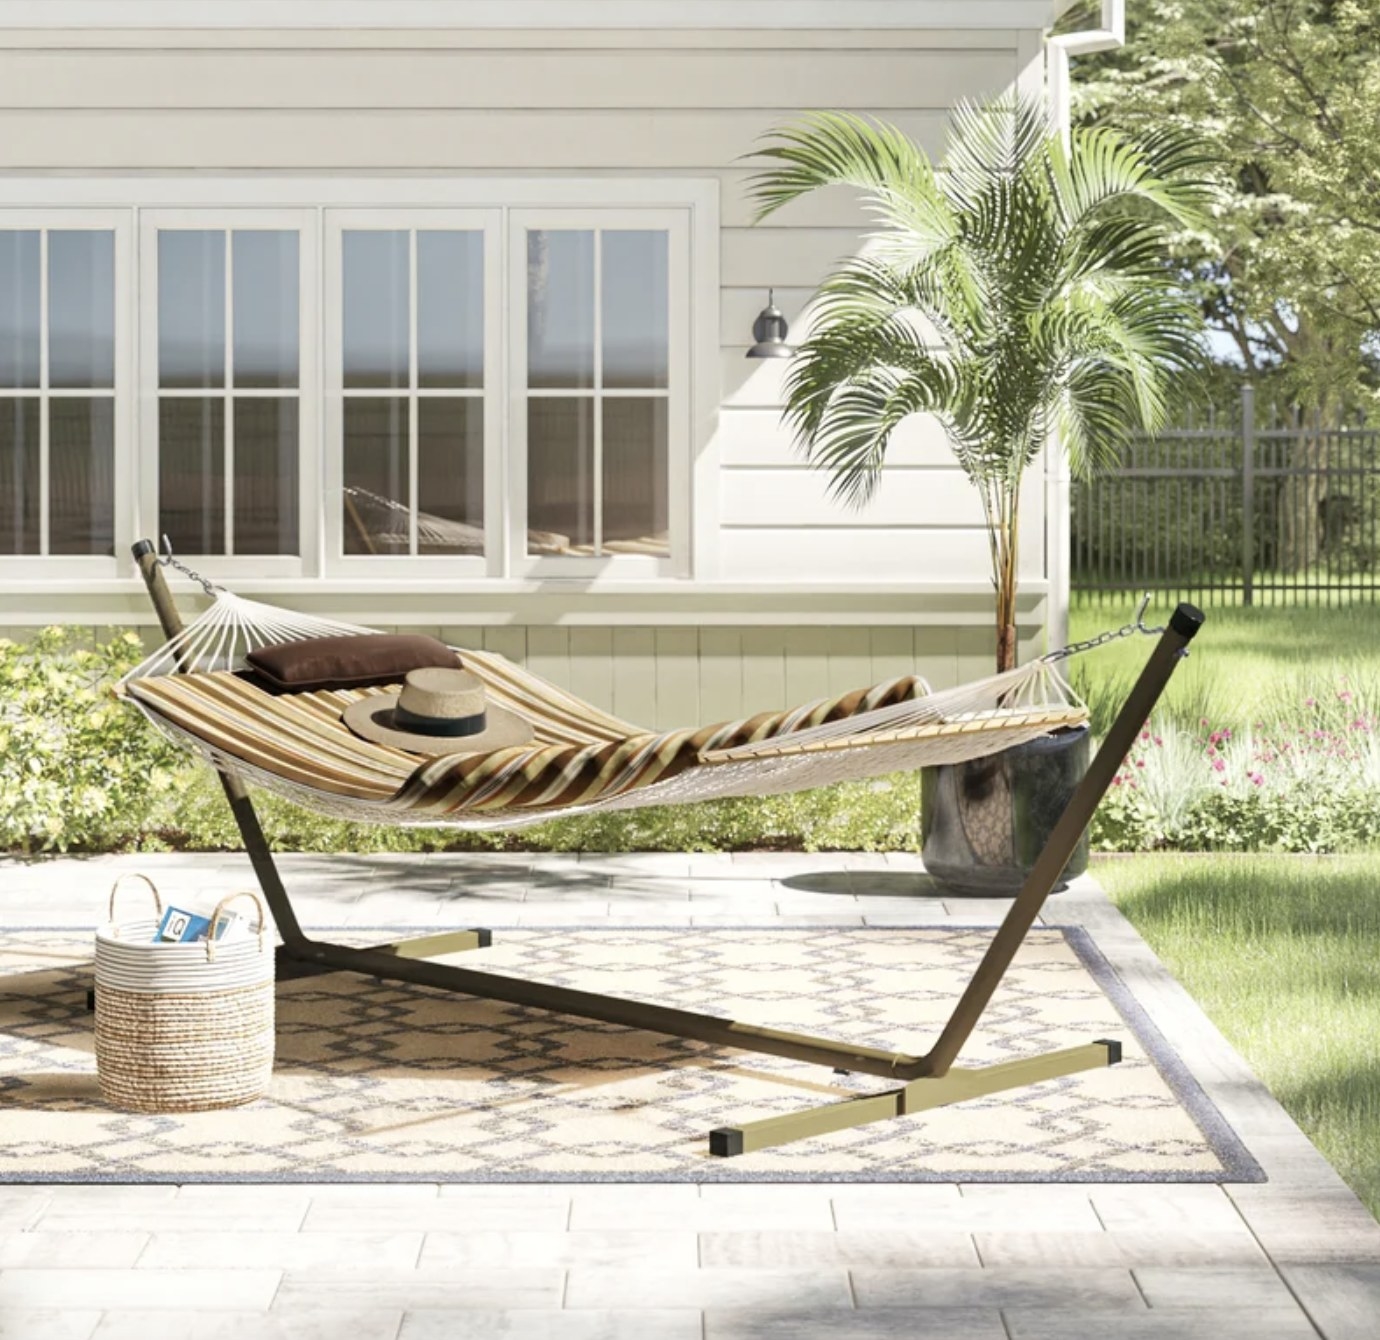 The white woven hammock has a green and tan stripe cover and brown pillow, and it&#x27;s set up outside in the sunshine